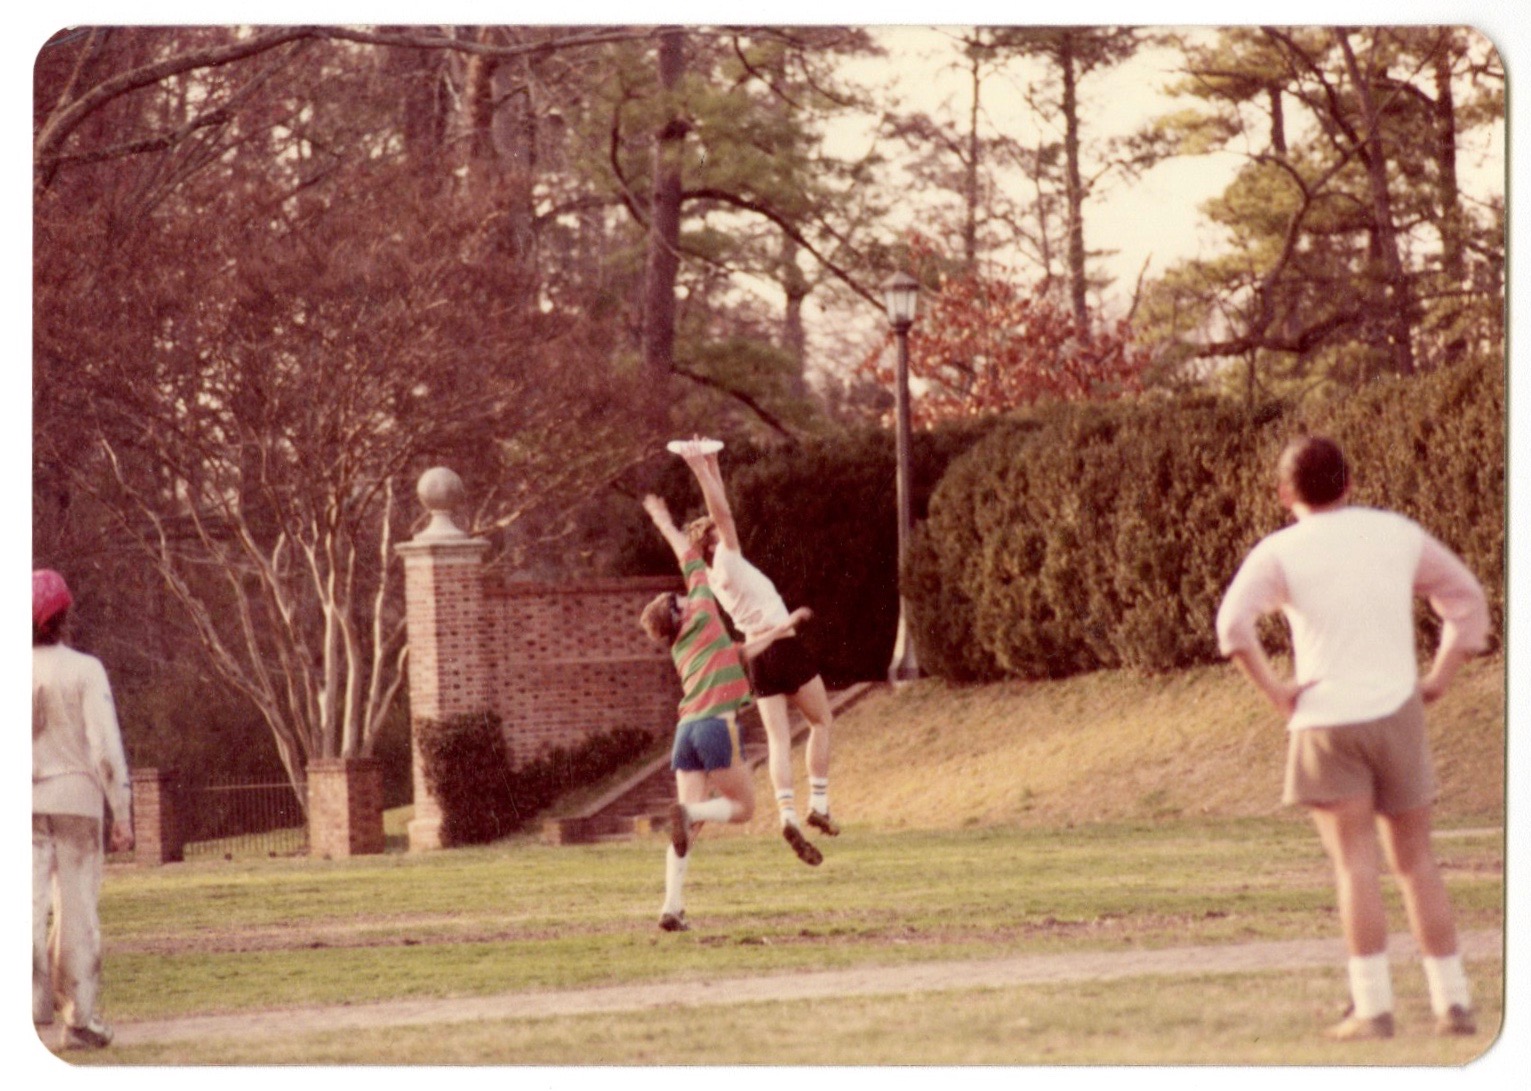 Photograph from the 1980s featuring two Ultimate Frisbee players reaching for a flying disc on the Sunken Garden. Another two players stand with their backs to the camera, watching the contest take place.